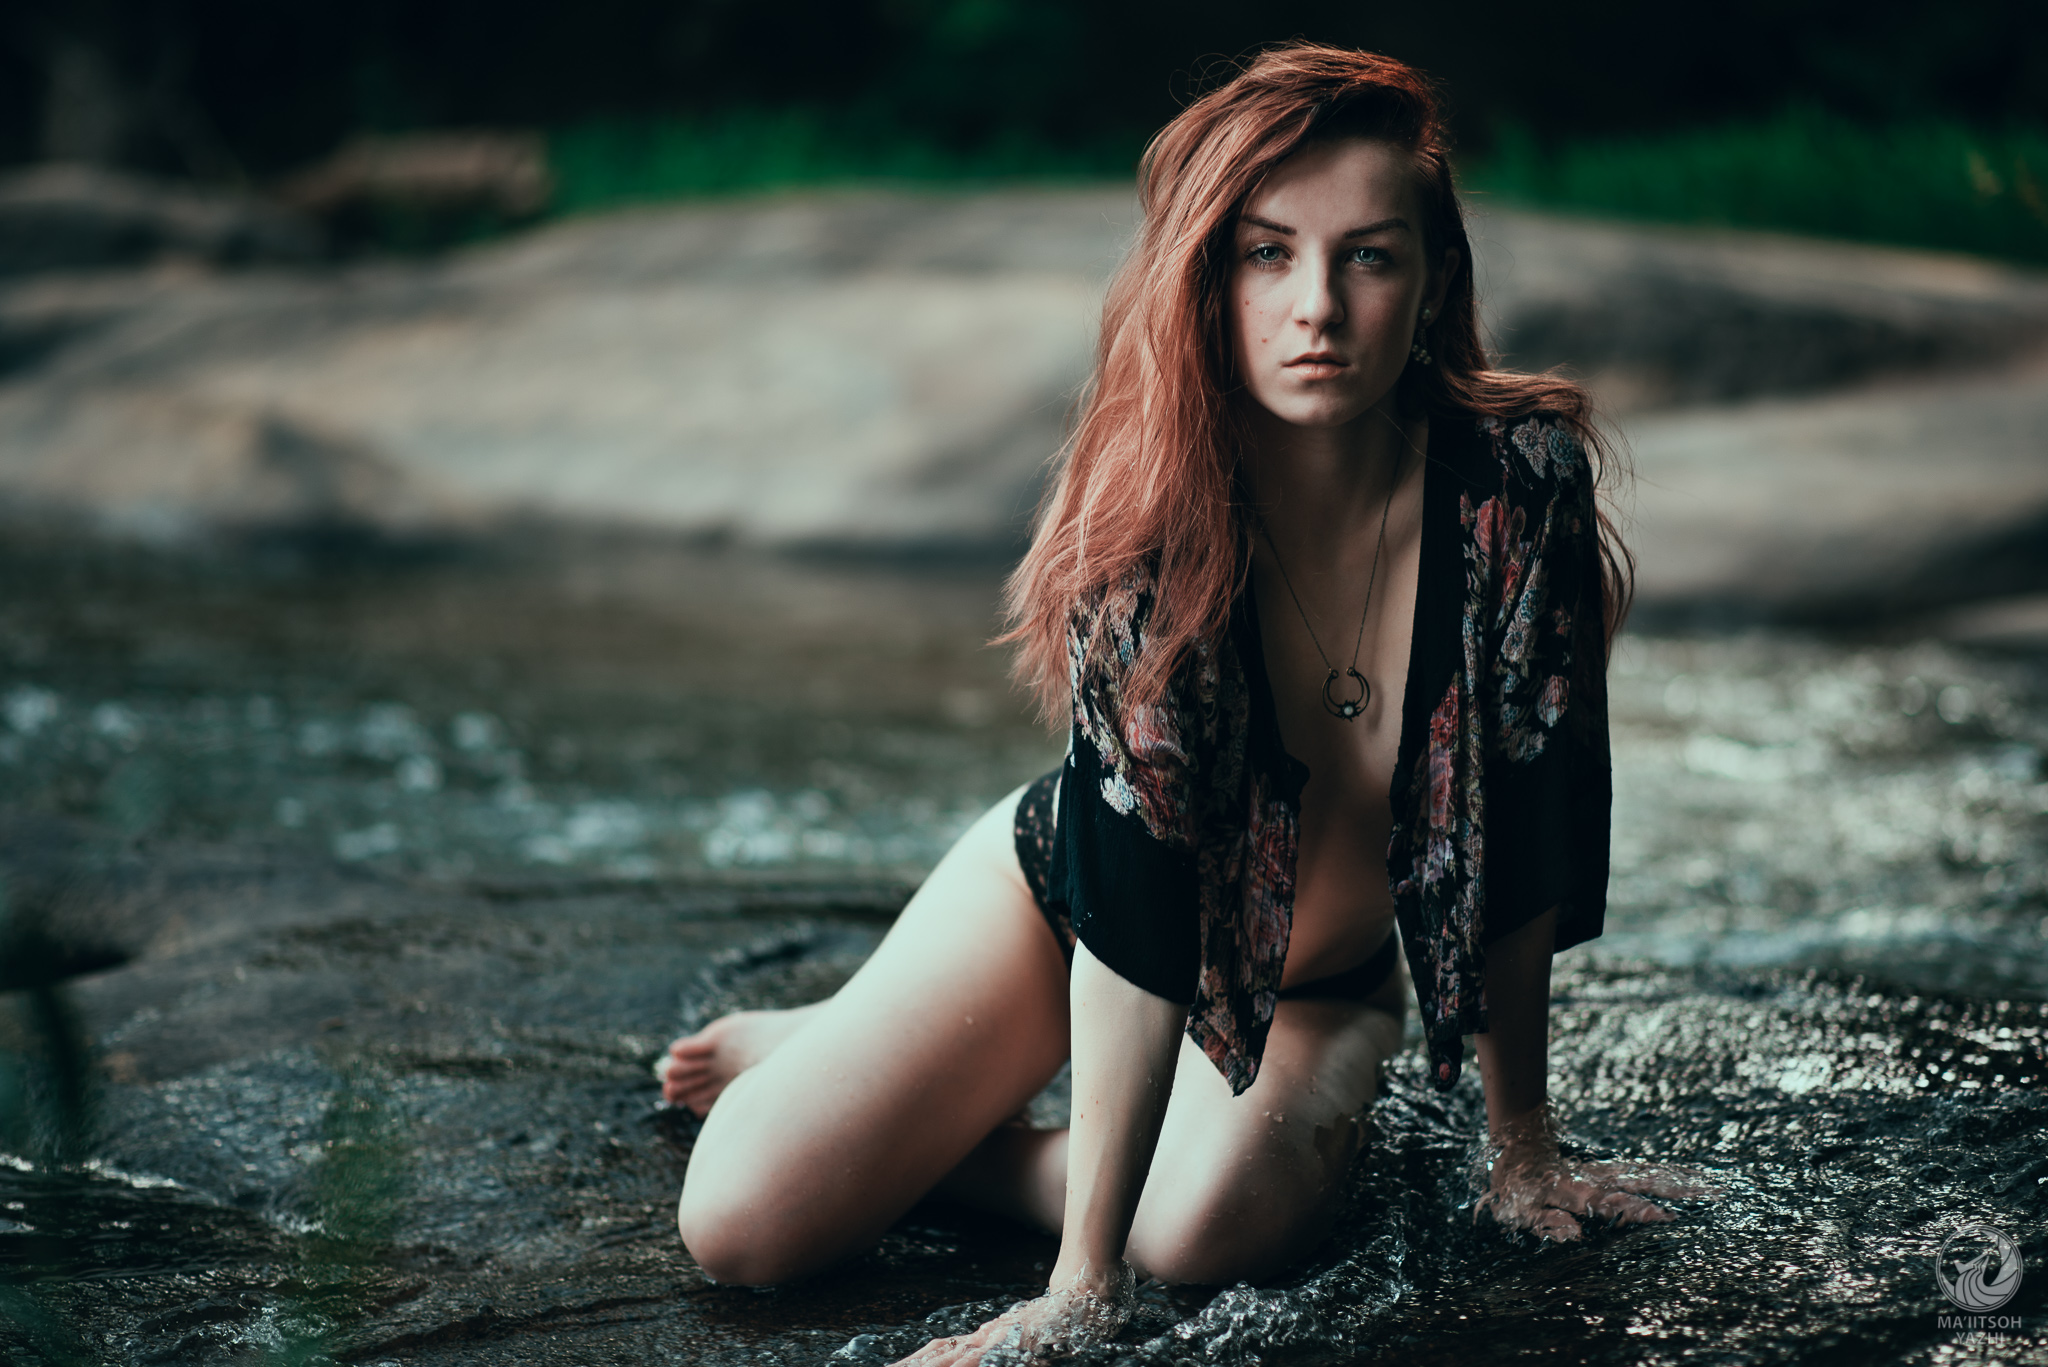 Heather on the Shore (Preview)